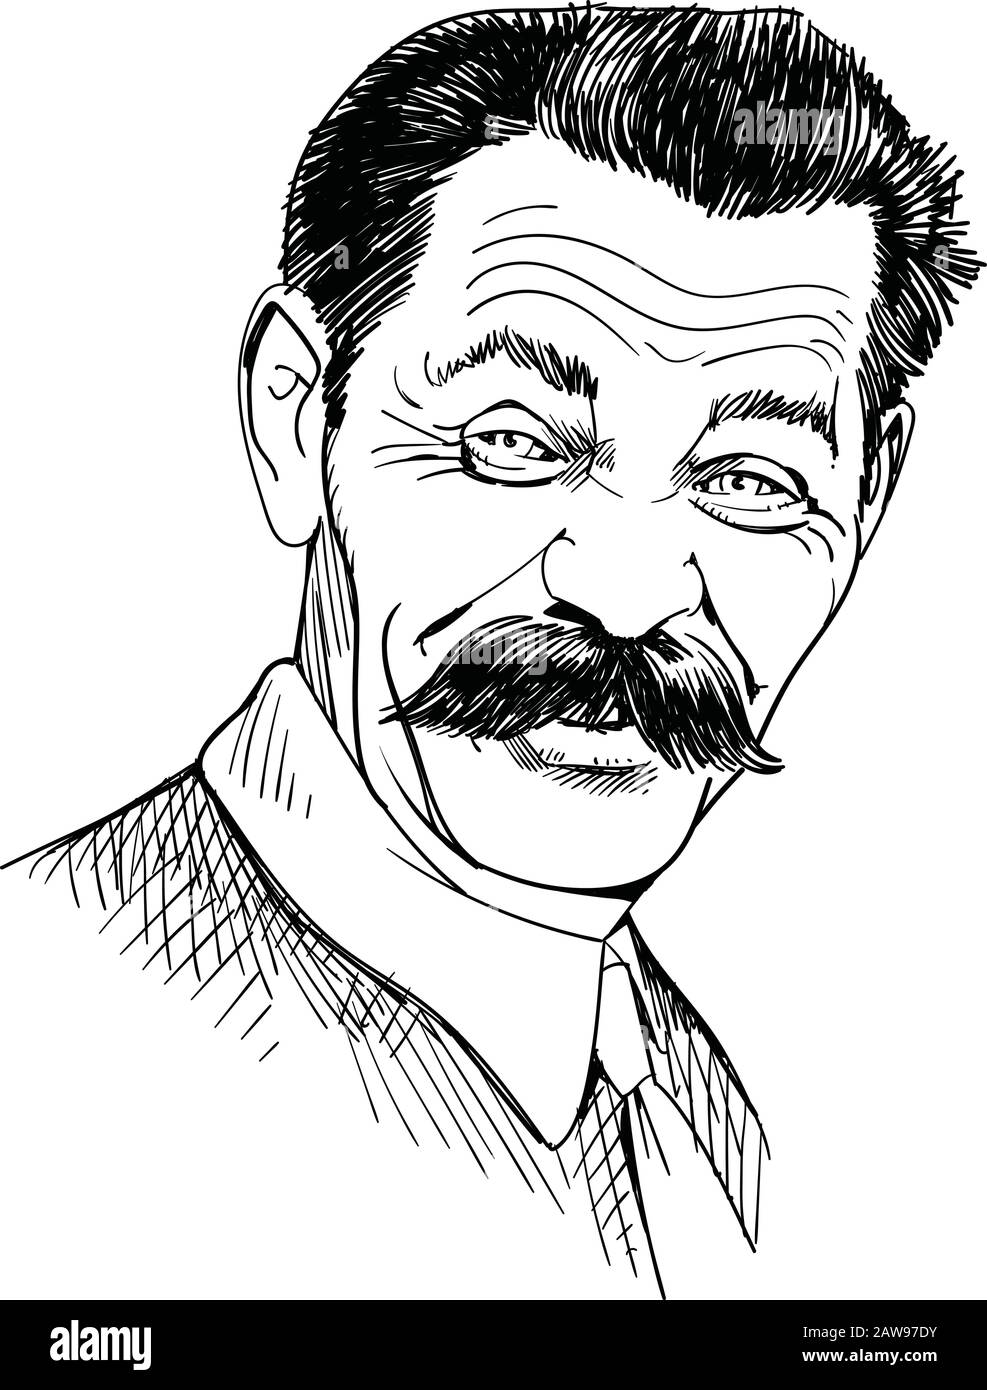 Alexei Maximovich Peshkov, primarily known as Maxim Gorky, was a Russian and Soviet writer, a founder of the socialist realism literary method. Stock Vector